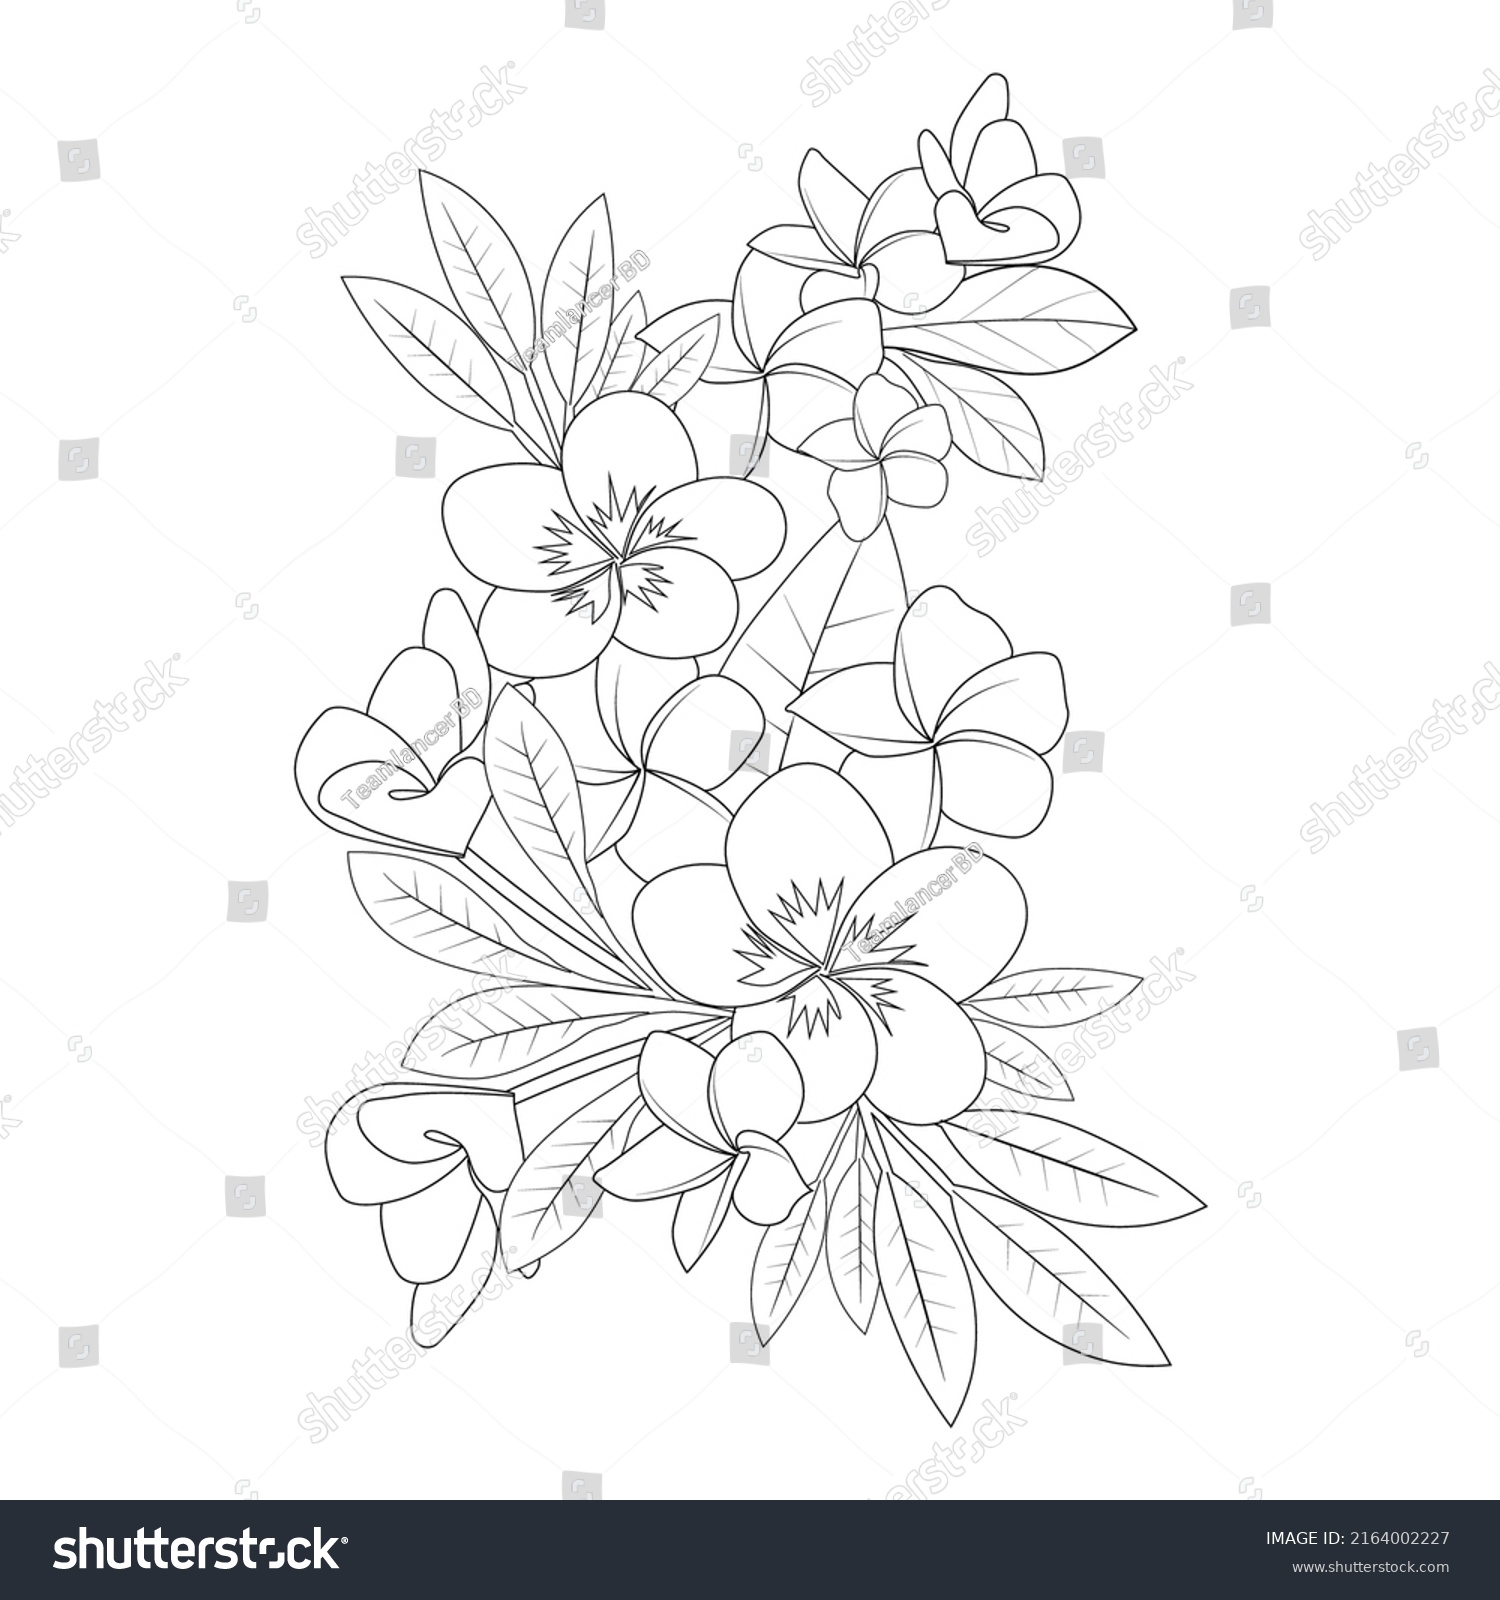 Plumeria Flower Doodle Coloring Page Outline Stock Vector (Royalty Free ...